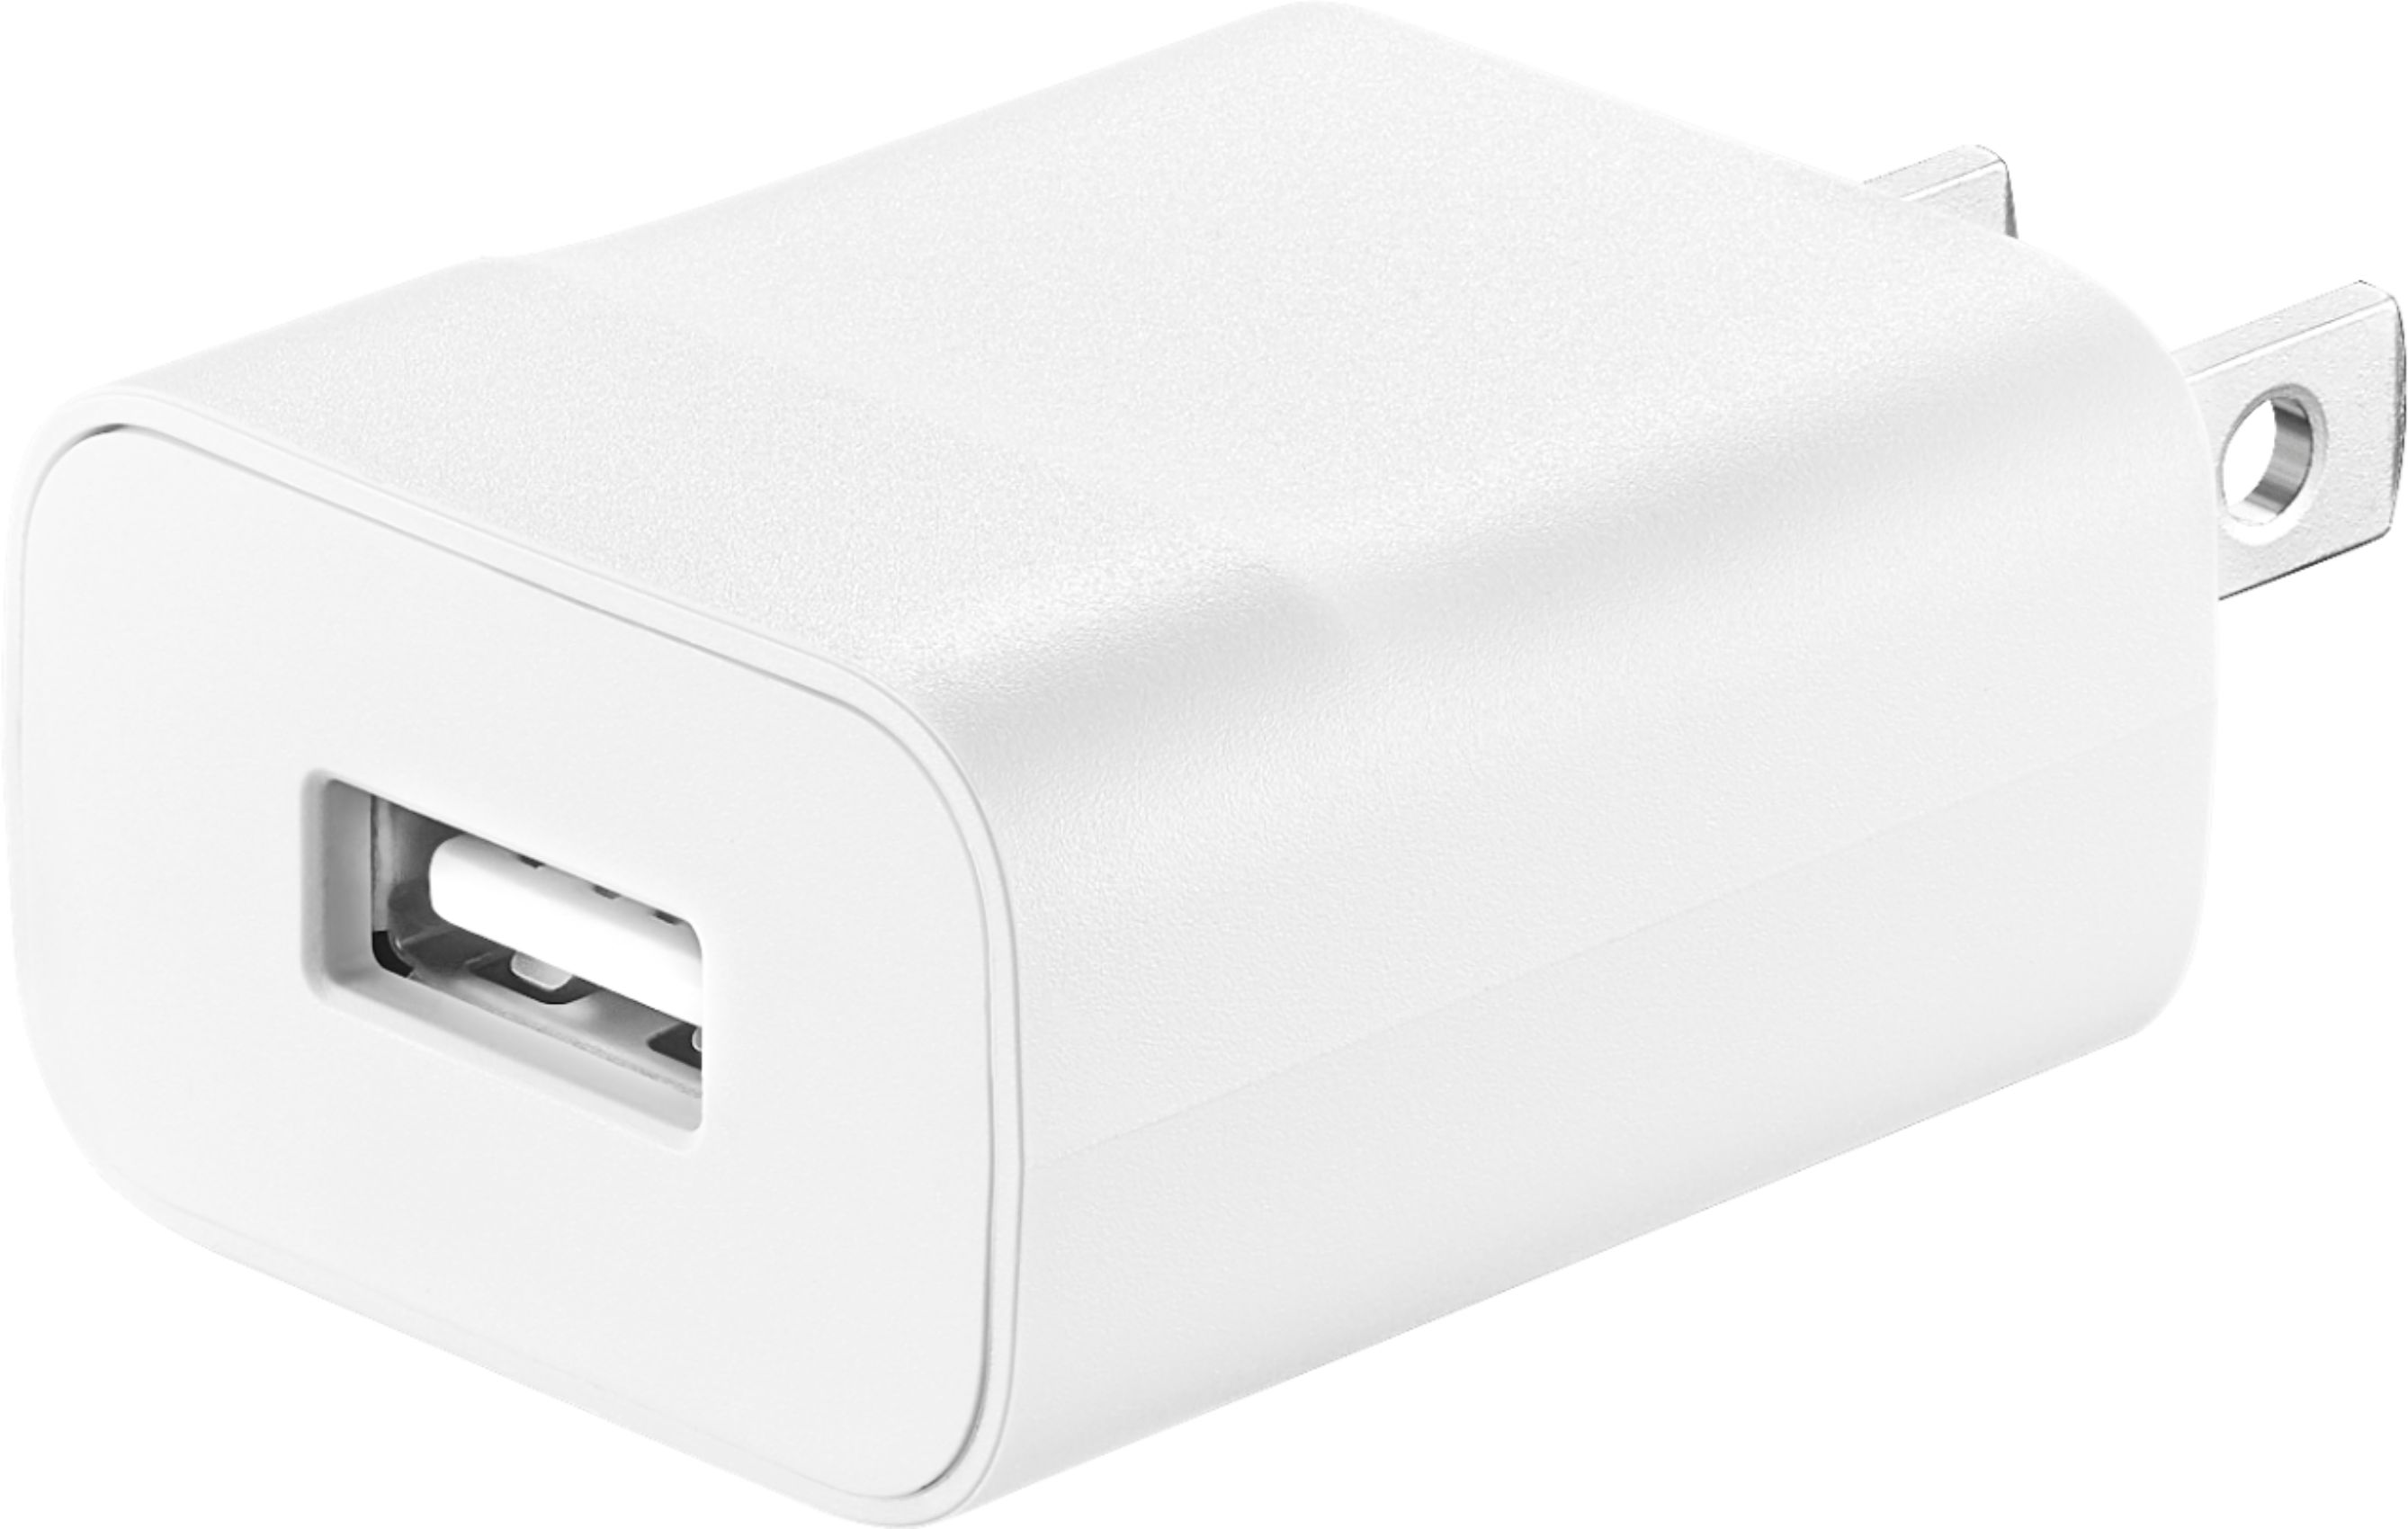 Best Buy essentials™ 5 W USB Wall Charger White BE-MWC5W22W - Best Buy